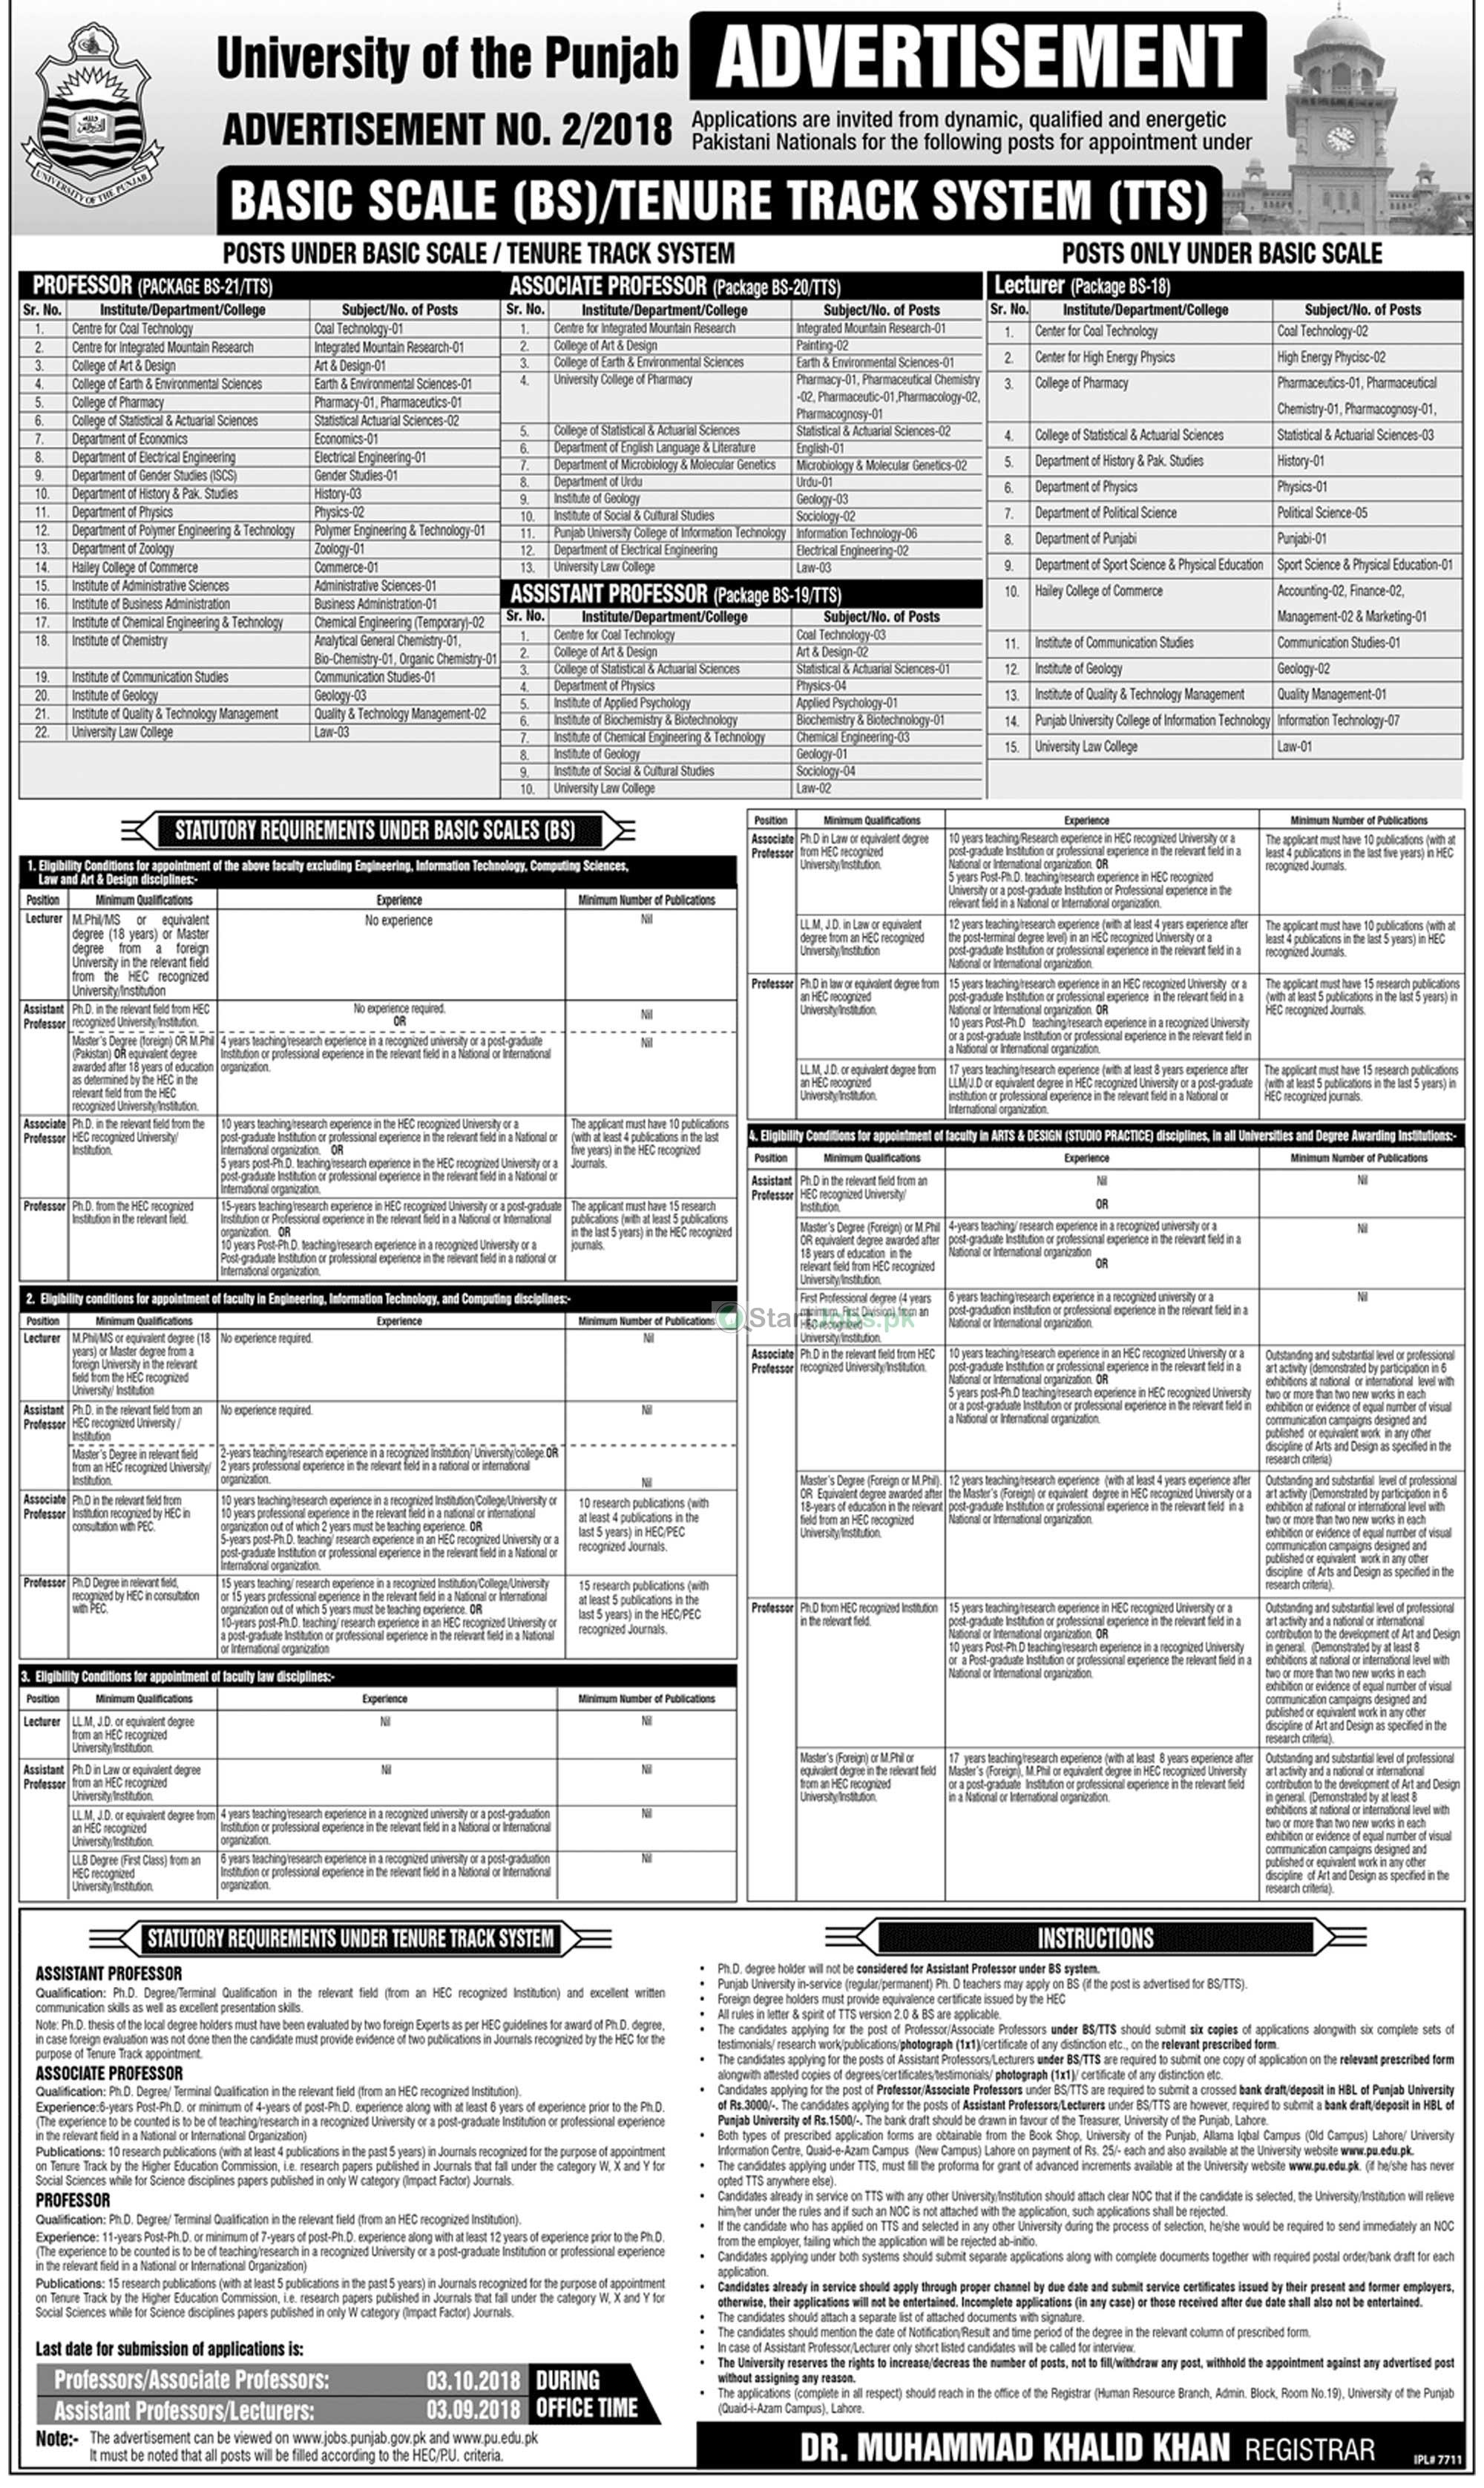 University Of The Punjab PU Jobs For Professor, Assistant Professor & Others 